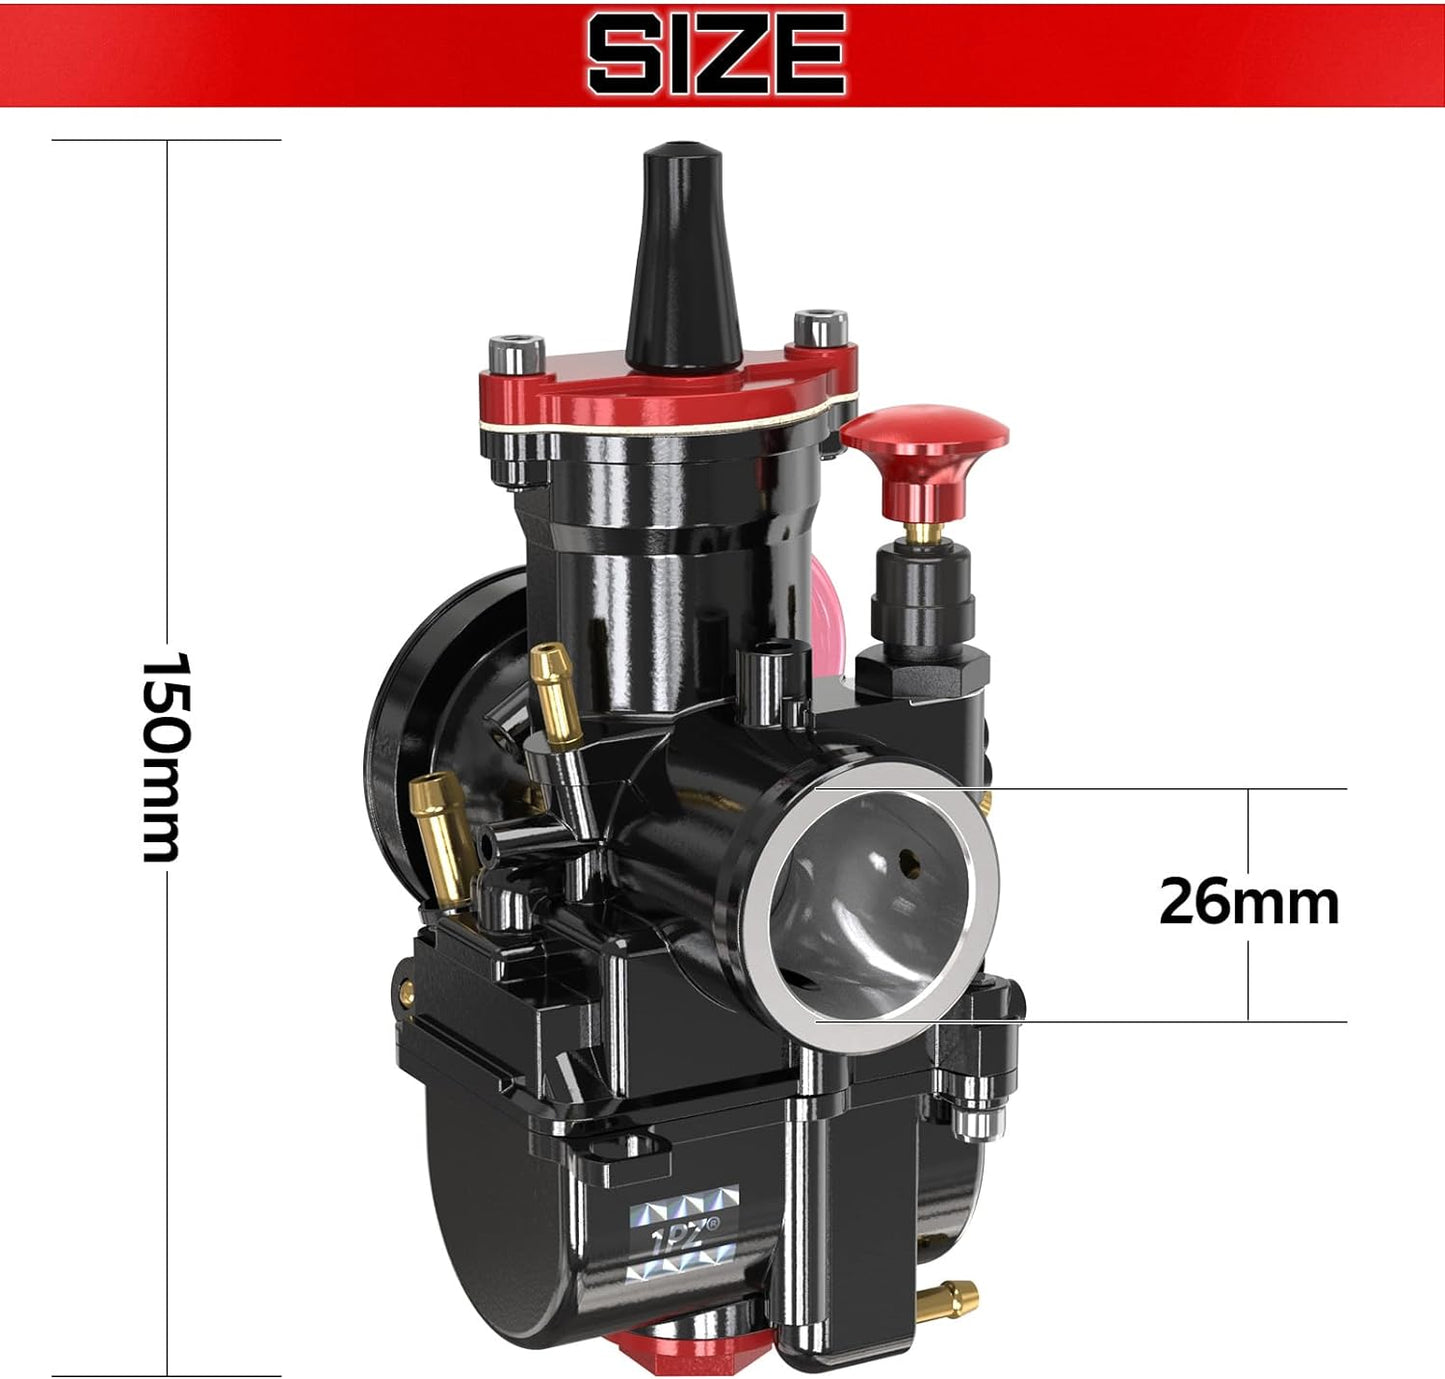 1PZ PW0-K26 PWK 26MM Carburetor Carb With Air Filter Interface Wind Cup Replacement for 70cc to 140cc 2T 4T Engine GY6 Engine Dirt Bike Mini Bike SSR TTR Apollo TaoTao ATV